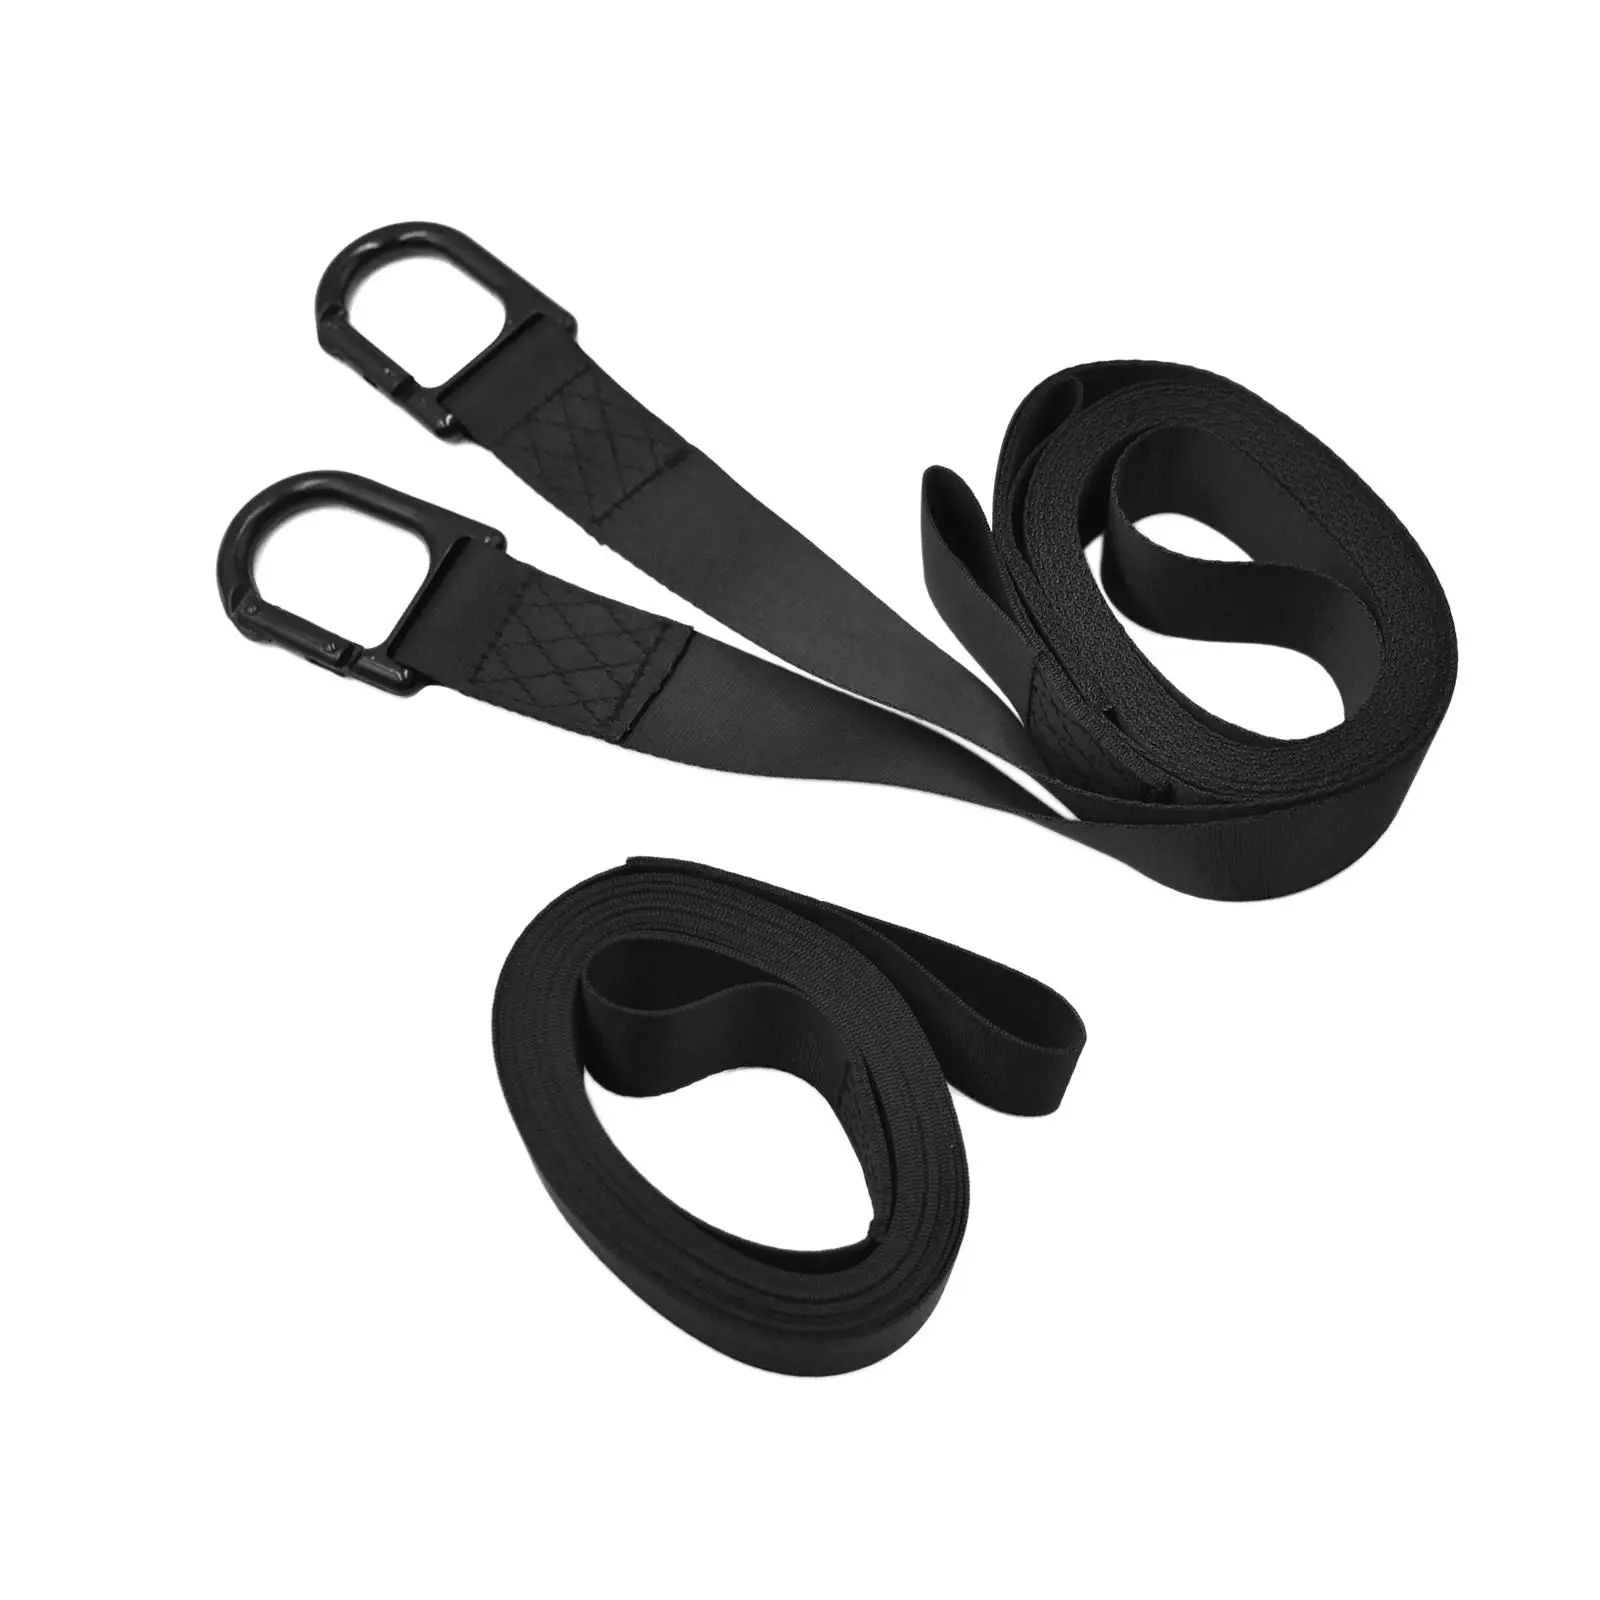 Snowmobile Tow Strap Quick Hook up and Tow Easilly Heavy Sled Pulling Straps